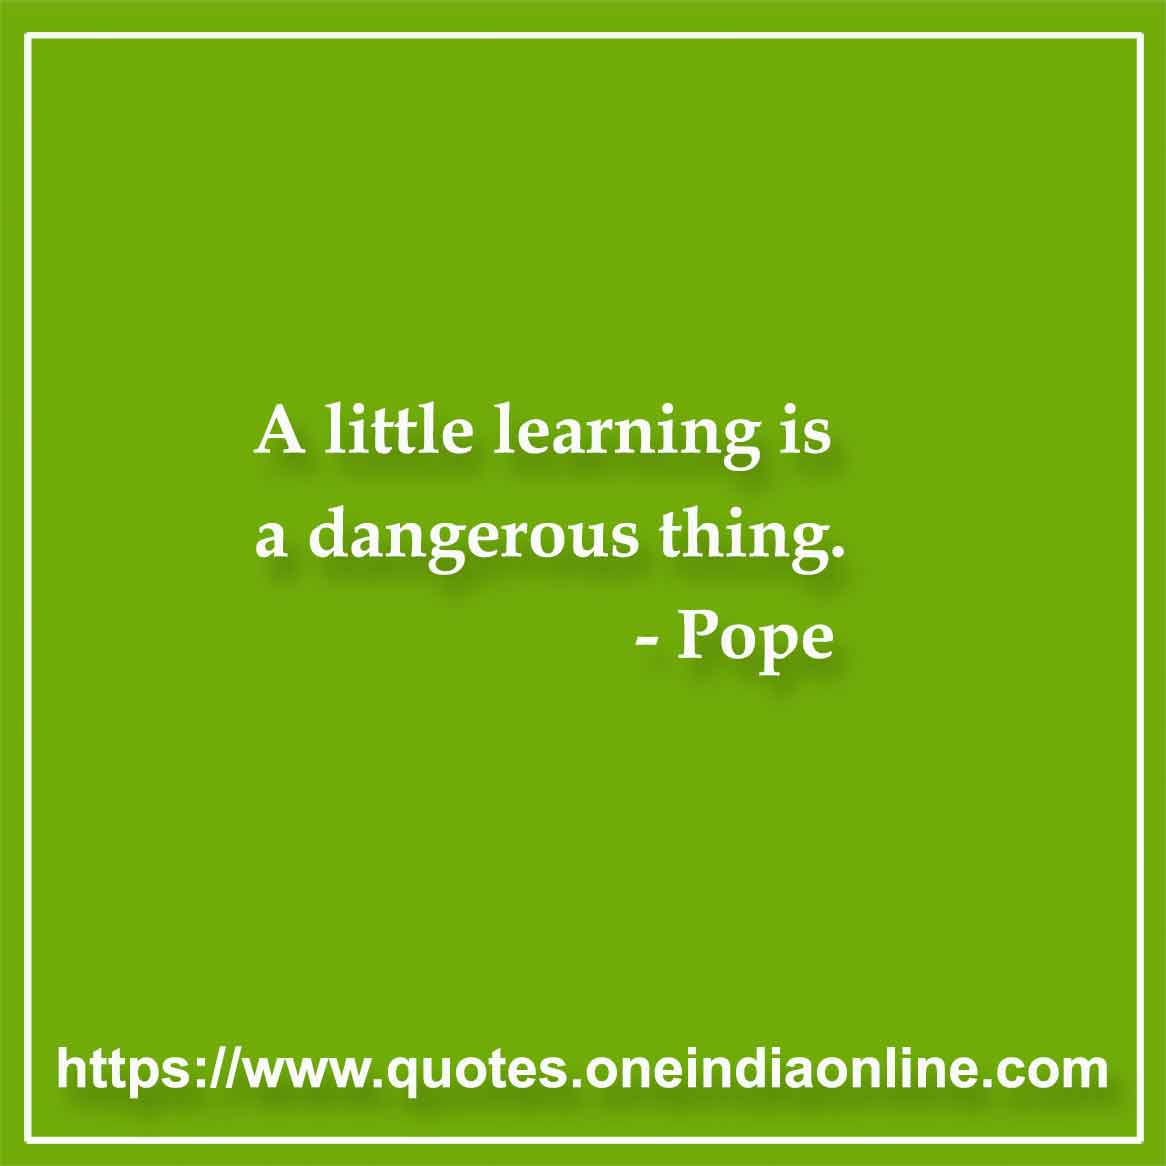 A little learning is a dangerous thing.

- Pope